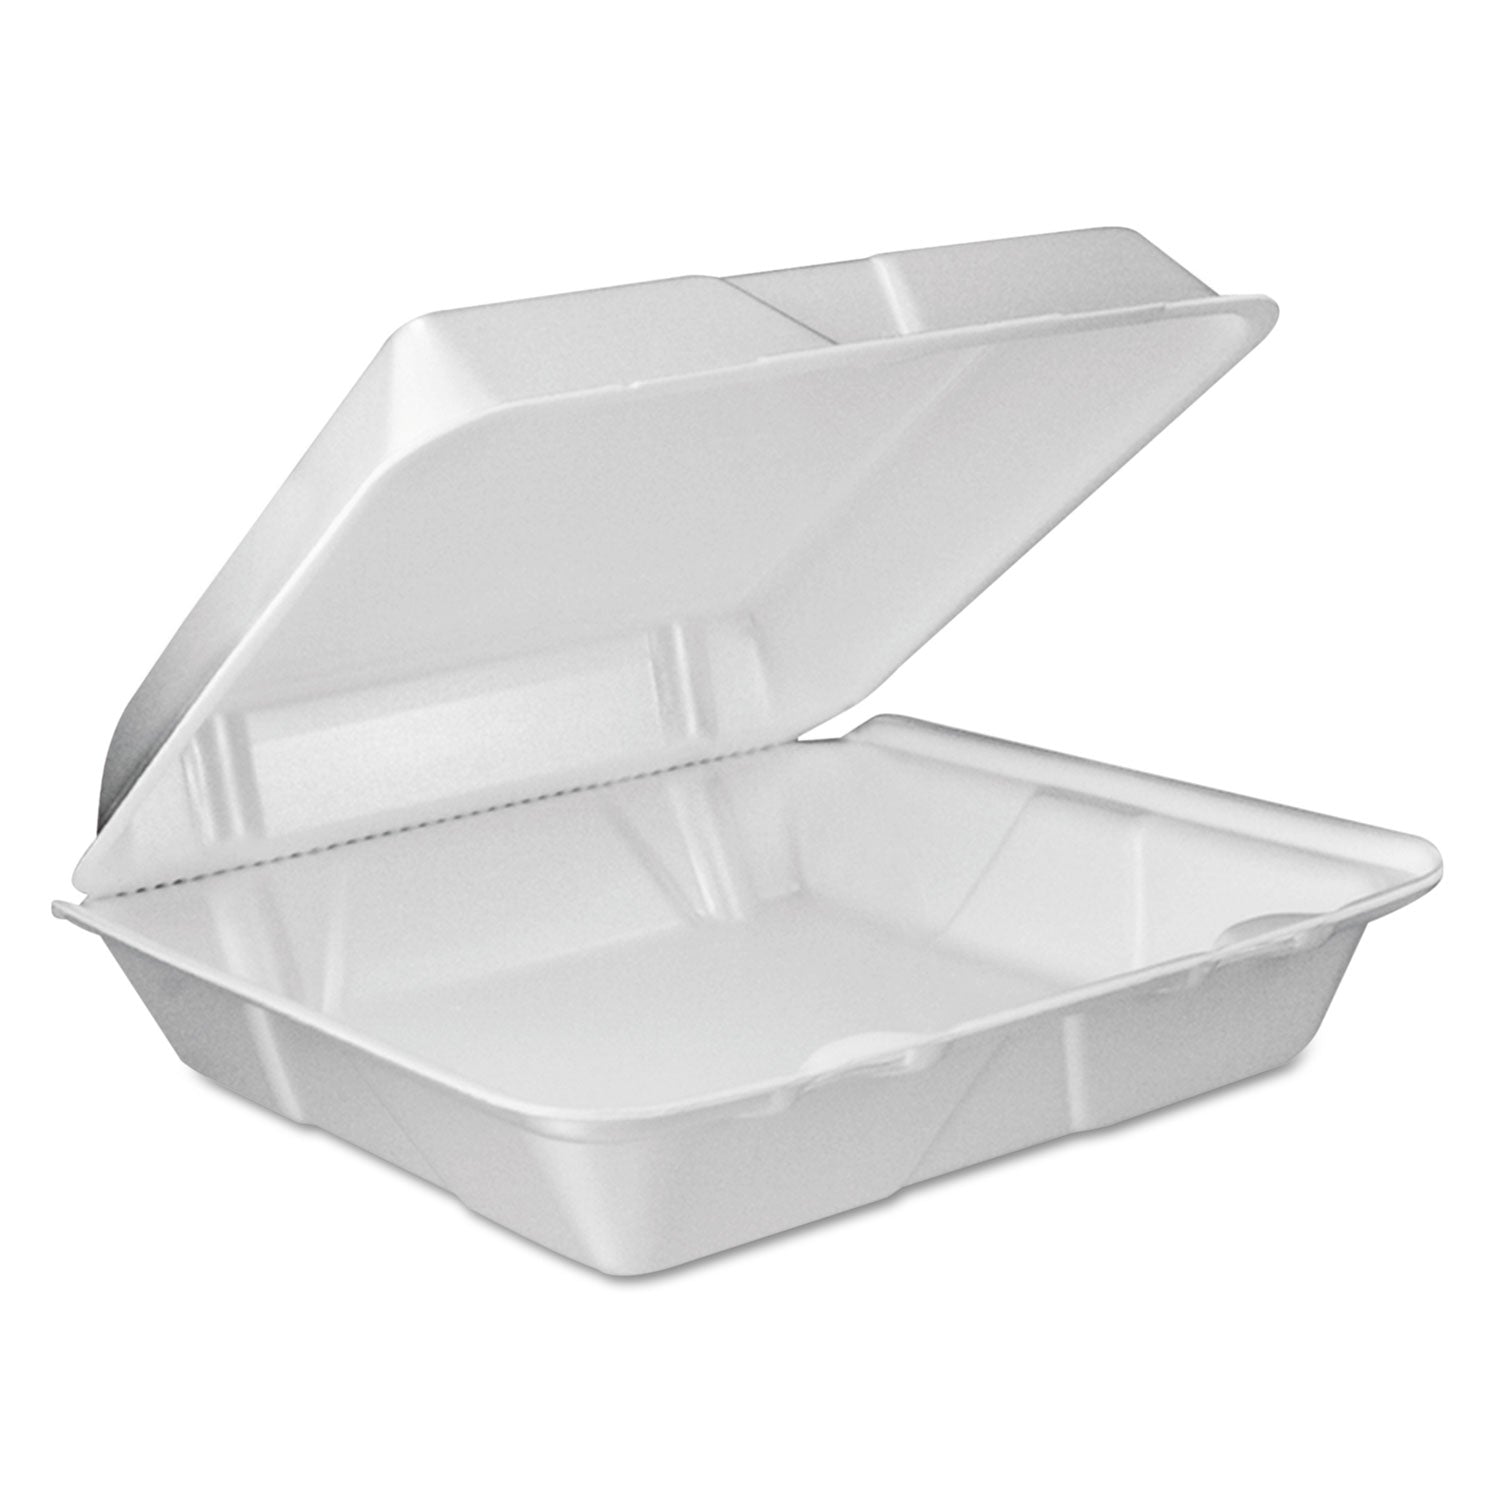 foam-hinged-lid-container-vented-lid-9-x-94-x-3-white-100-pack-2-packs-carton_dcc90htpf1vr - 1